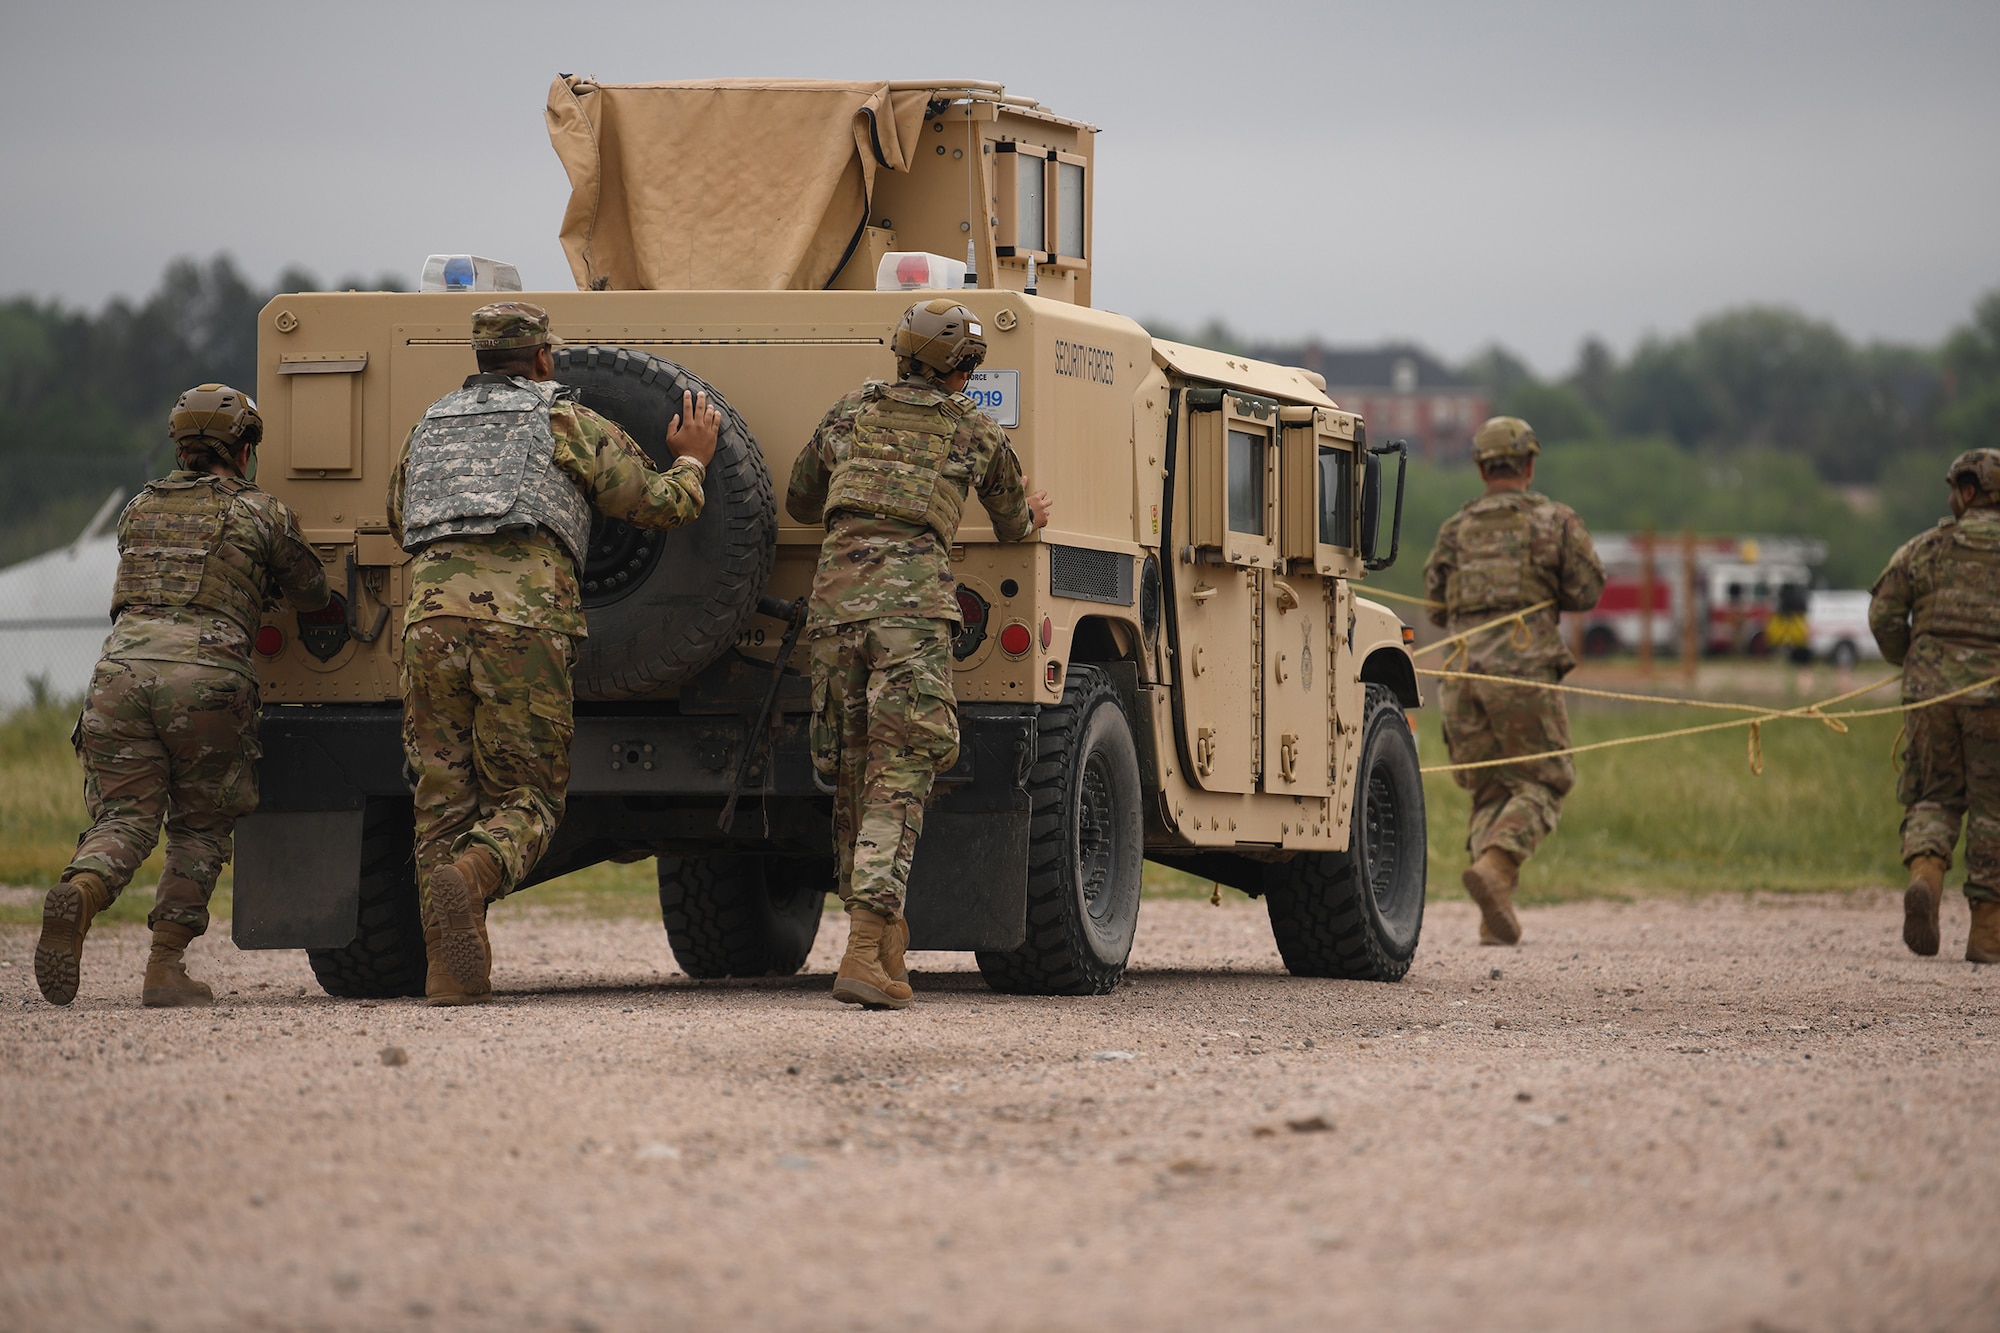 A group of Airmen push a High Mobility Multipurpose Wheeled Vehicle (HMMWV) during the 90th Civil Engineering Squadron Readiness Challenge on F.E. Warren Air Force Base, Wyoming, July 1, 2021. The purpose of the exercise was to train the readiness capabilities of the Airmen with the 90 CES. (U.S. Air Force photo by Airman 1st Class Darius Frazier)